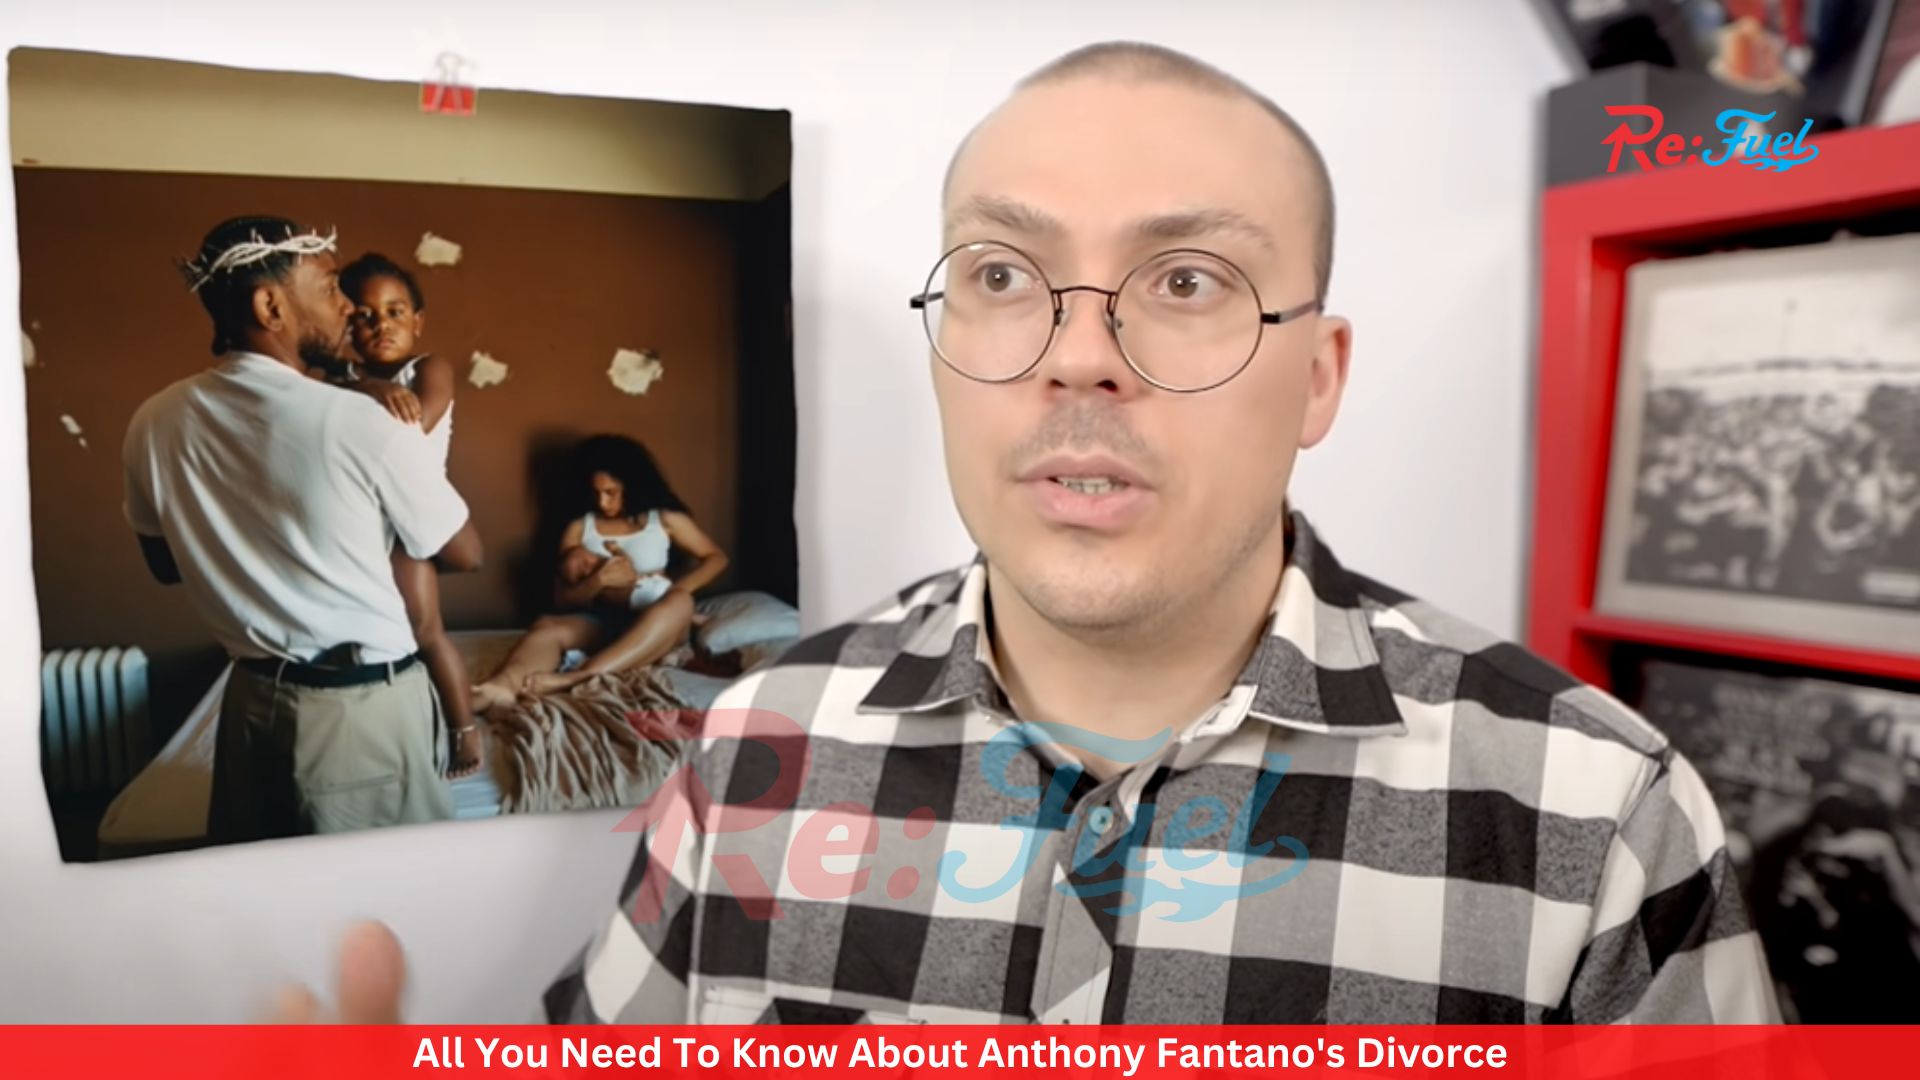 All You Need To Know About Anthony Fantano's Divorce